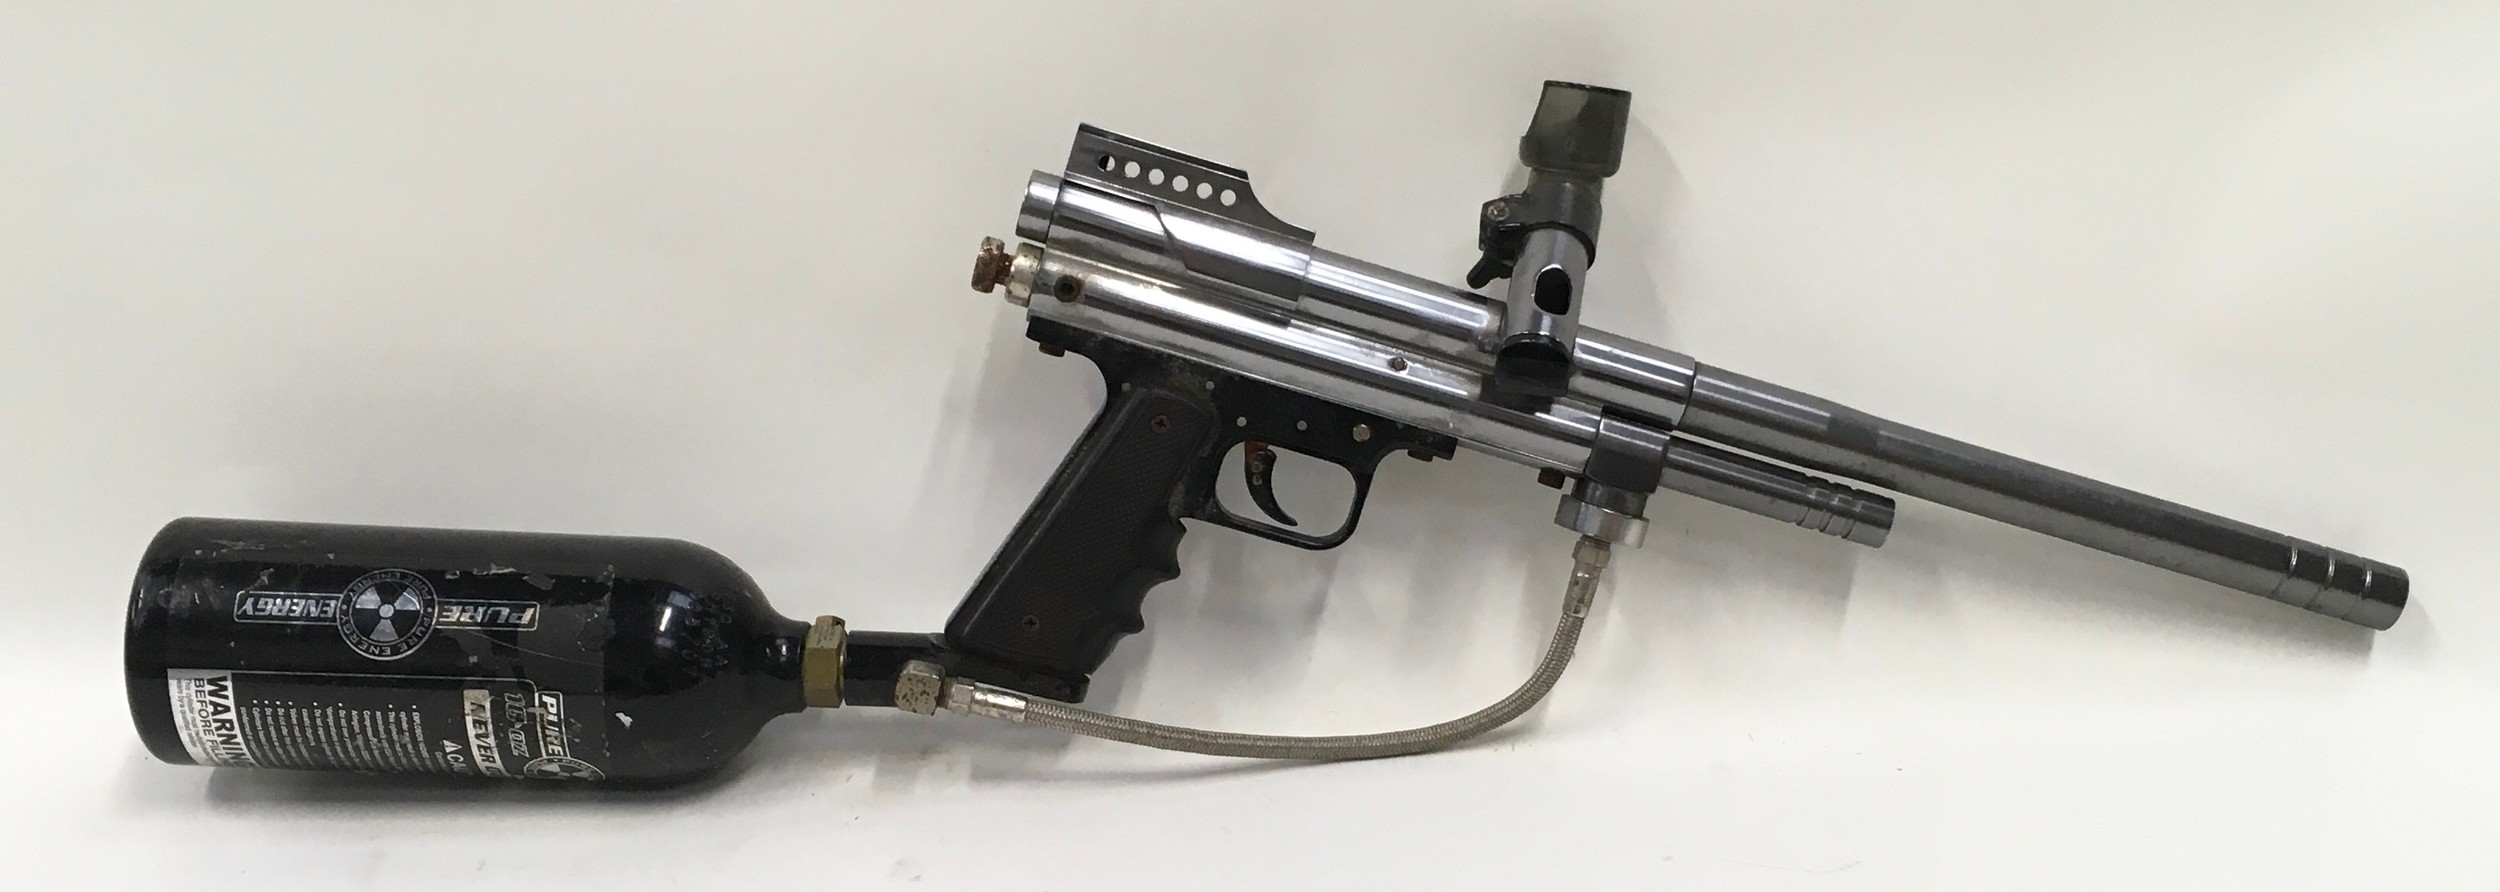 Paintball gun model SMK PBMI. with gas cartridge fitted. Appears to fire but ammo hopper missing. - Image 3 of 3